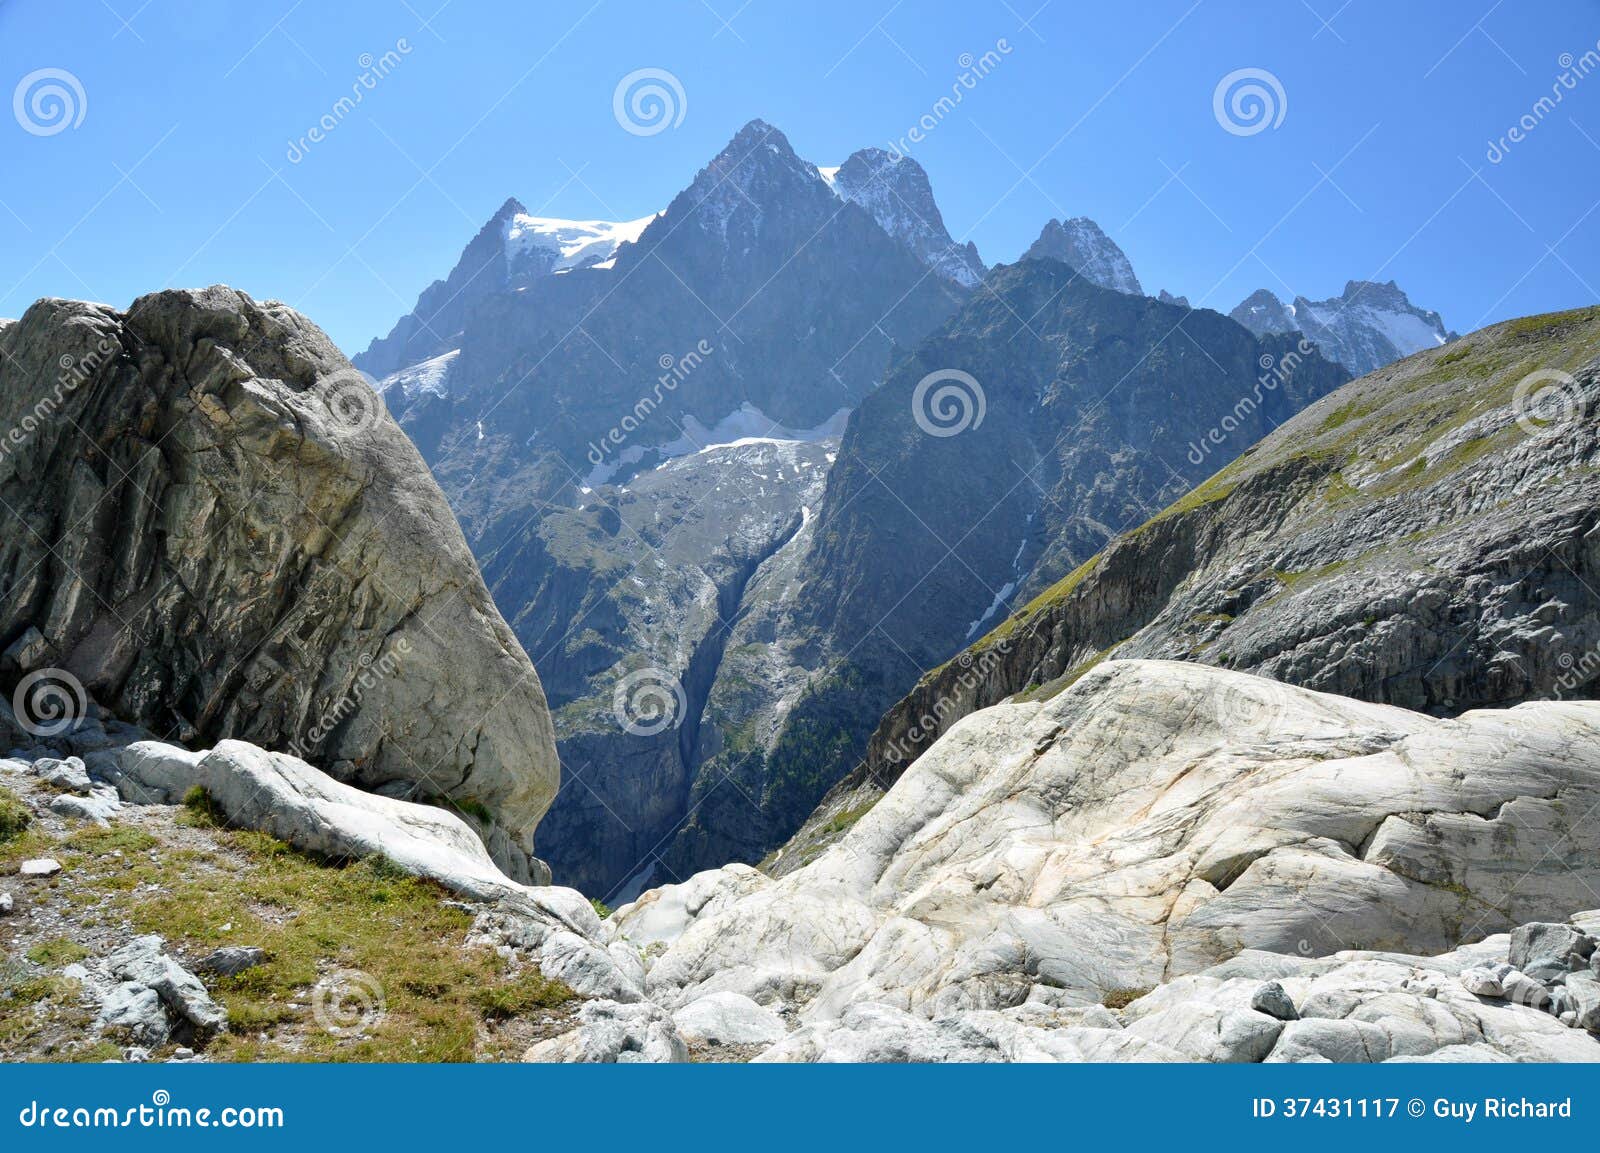 Southern Alps, France. French Alp Mountains, France, Europe